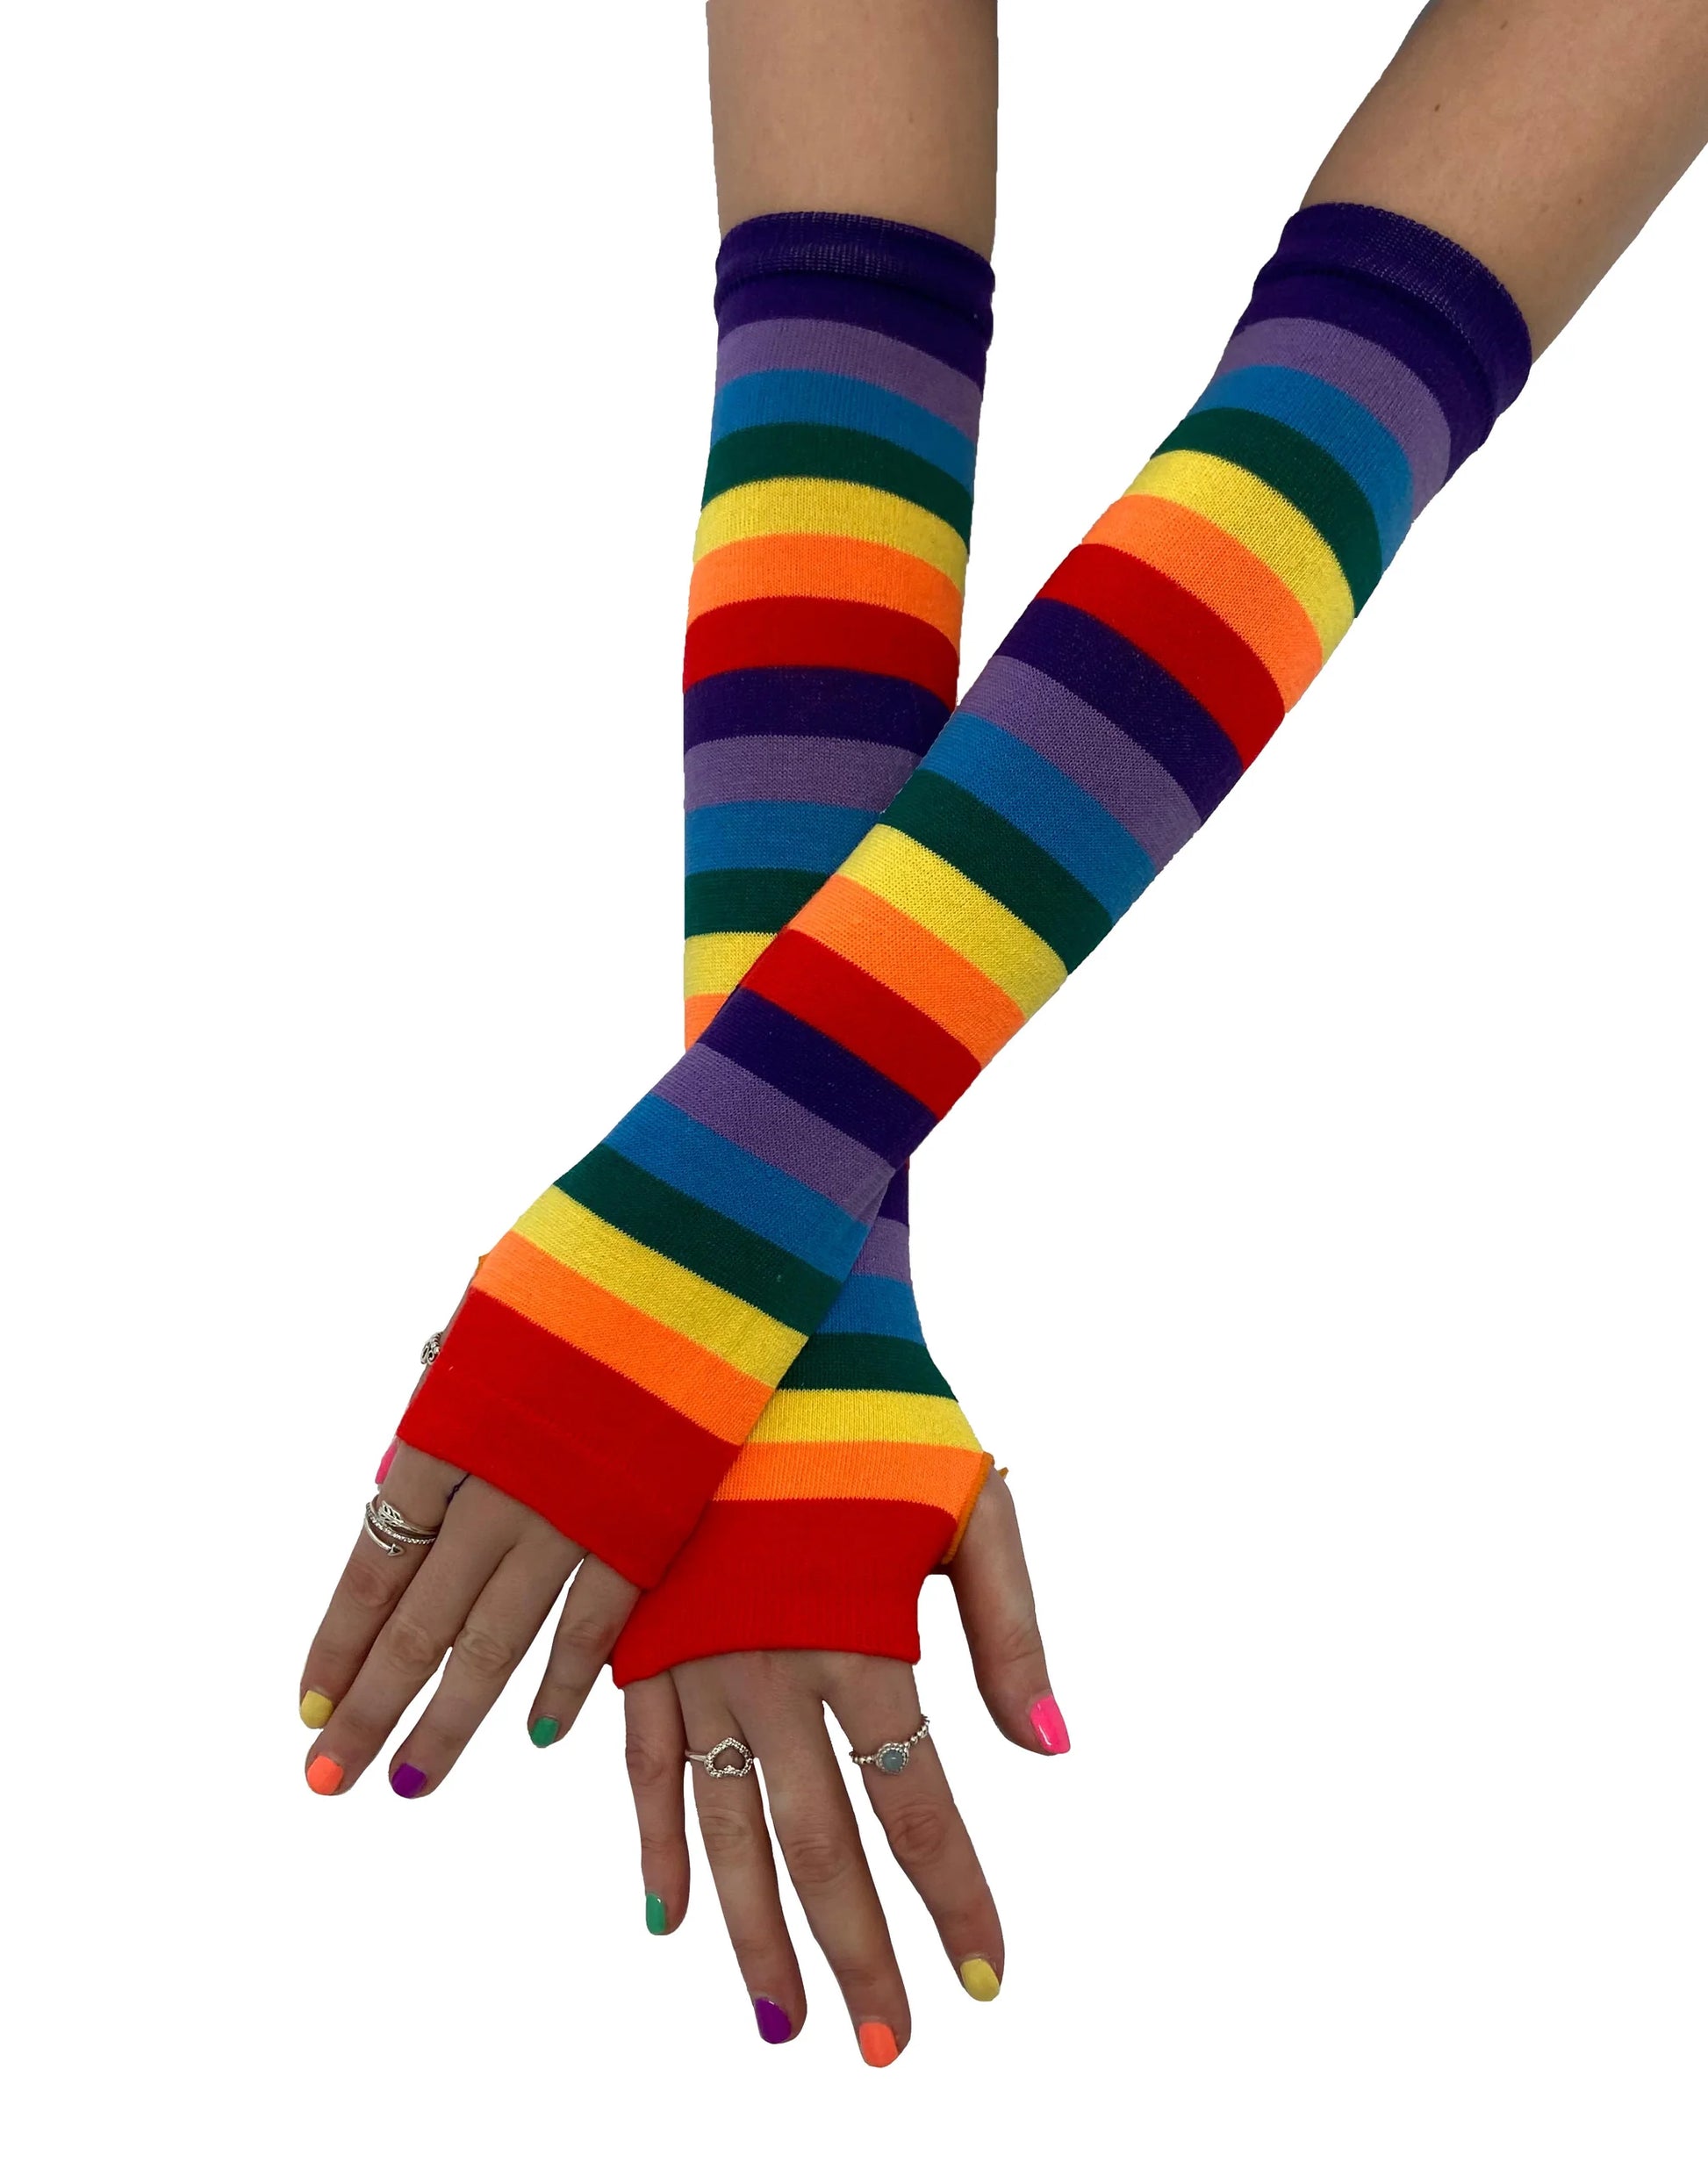 Pamela Mann Rainbow Stripe Sleevers - Multicoloured horizontal rainbow striped knitted tube arm sleeves with a hole for your thumb, perfect for lgbtq+ gay pride.